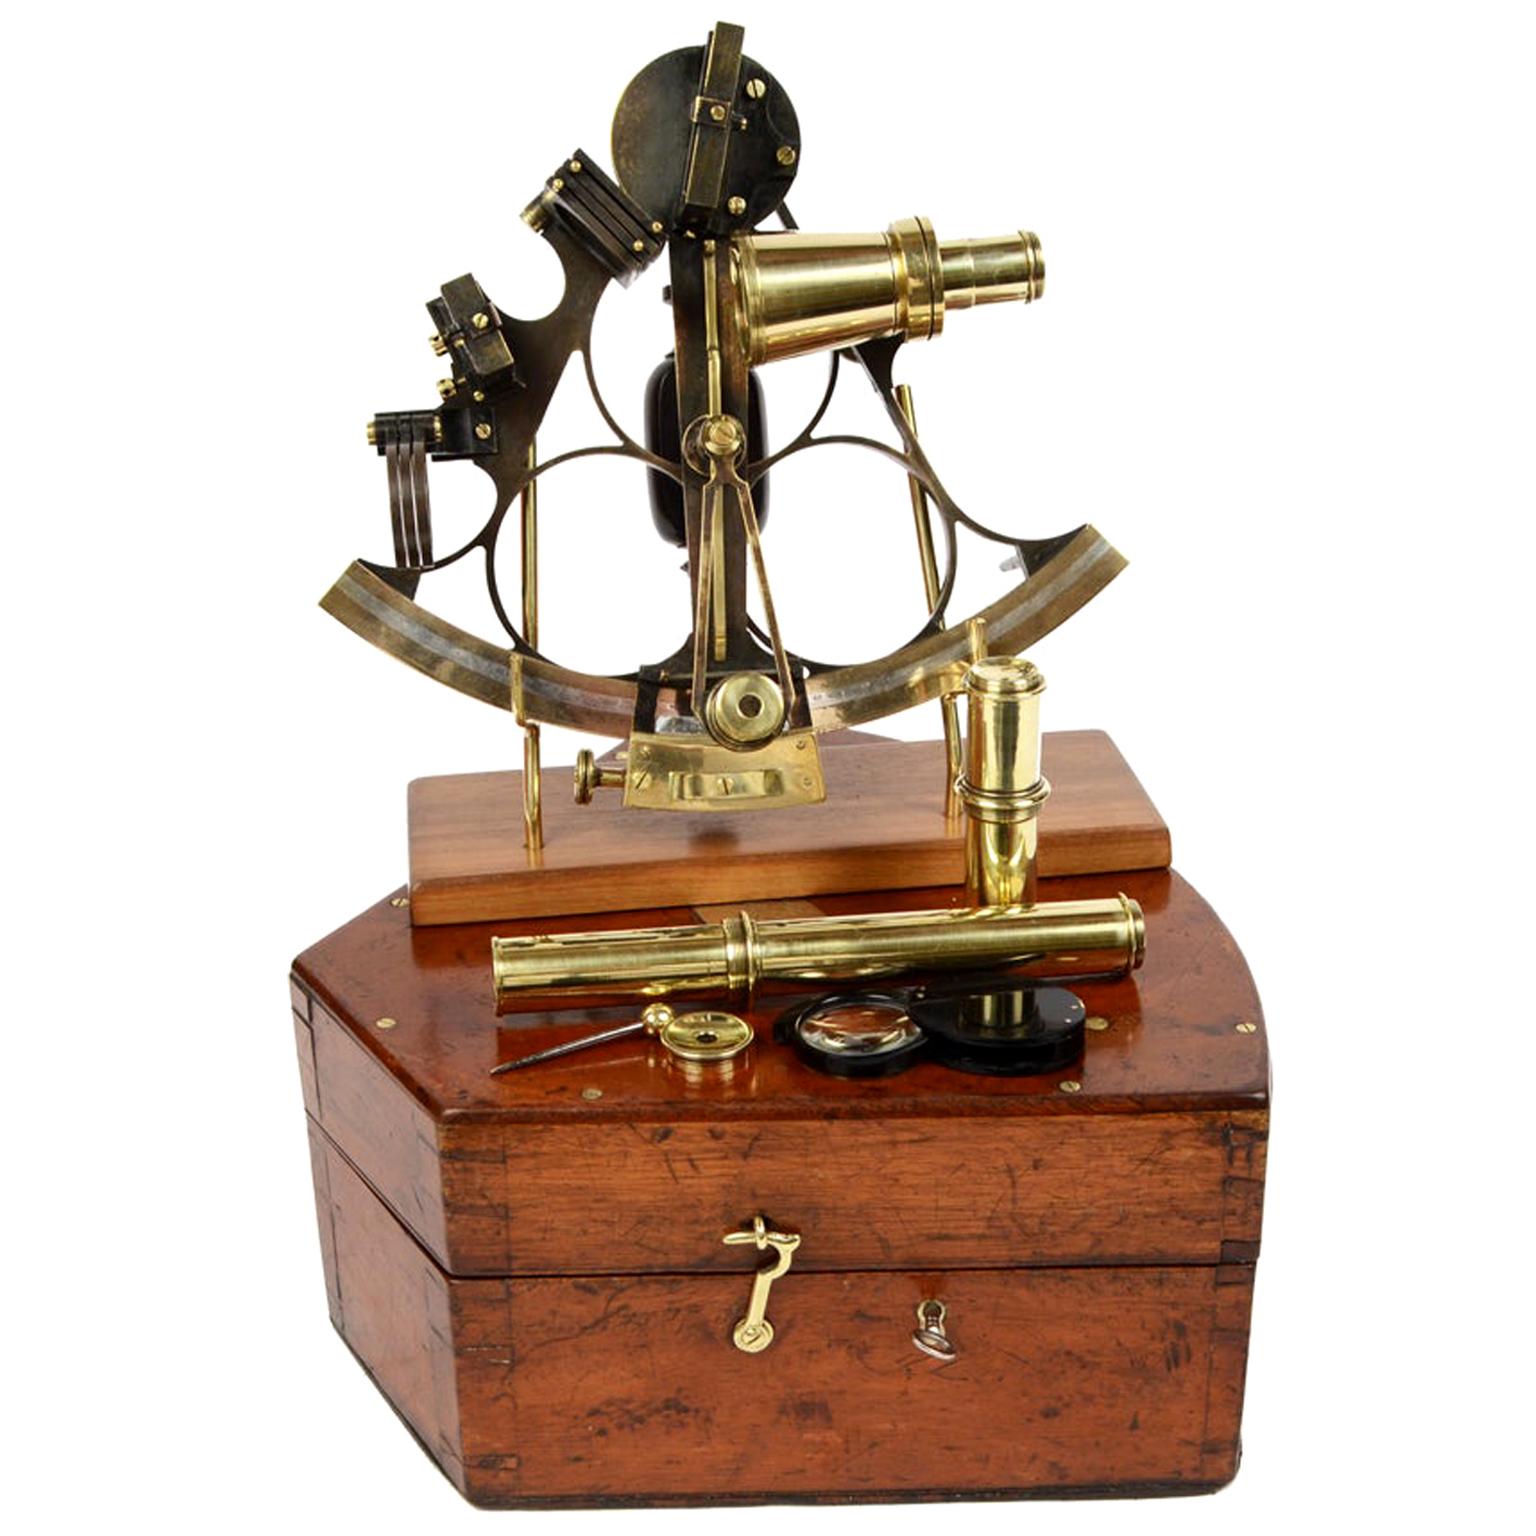 Burnished Brass Sextant Made in the Second Half of the 19th Century